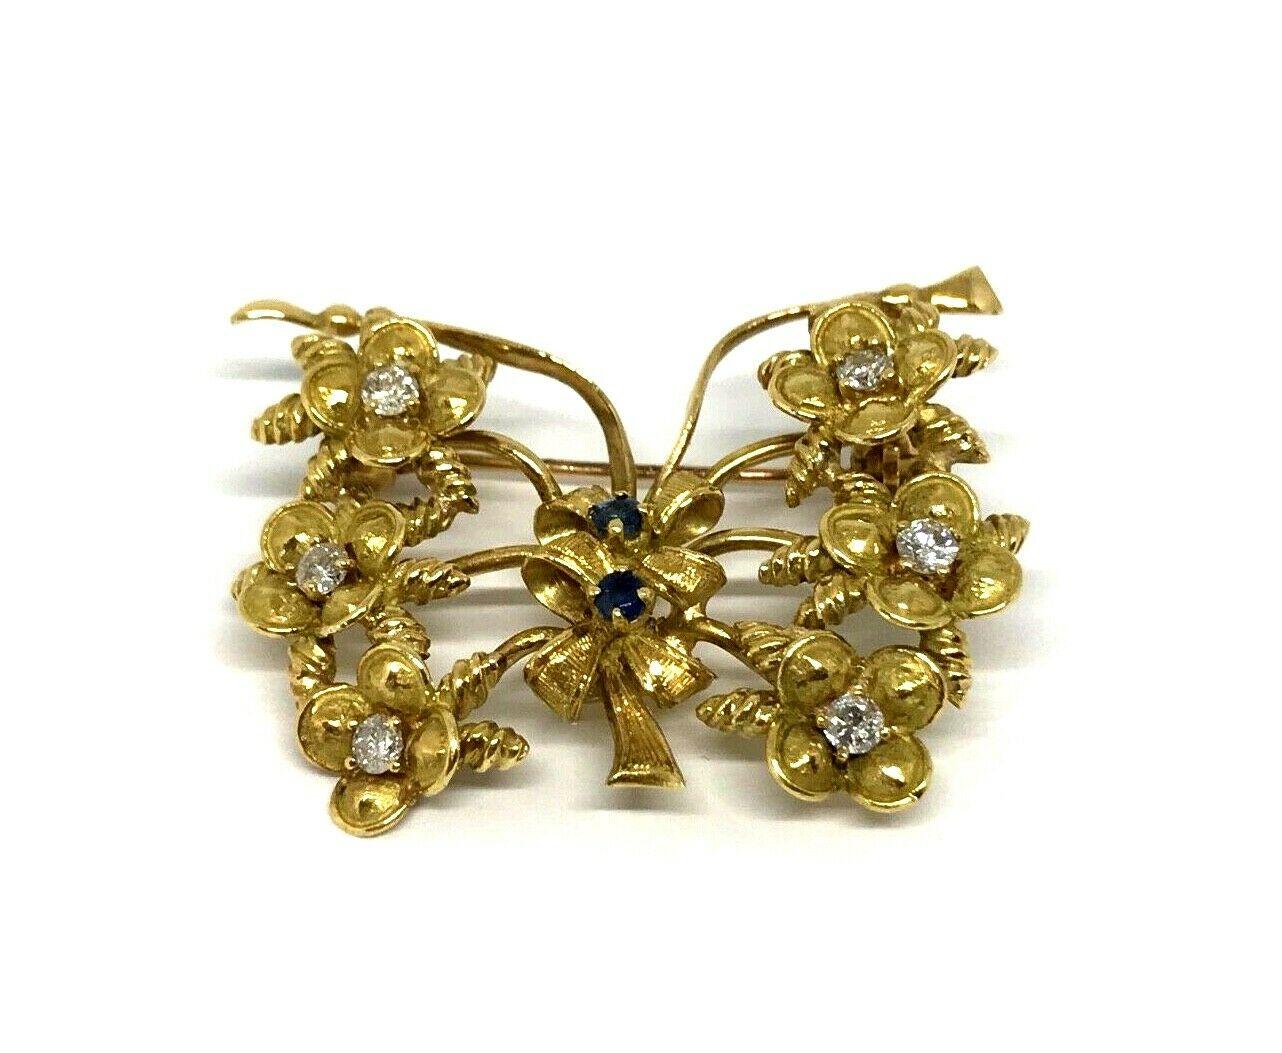 Circa 1960s Tiffany & Co. Butterfly pin made of 14k yellow gold features diamond and sapphire. Diamonds are round brilliant cut, G color, VS1 clarity, carat weight is 0.20 pts. Sapphires are round cut, about 0.80 pts.
Stamped with the Tiffany